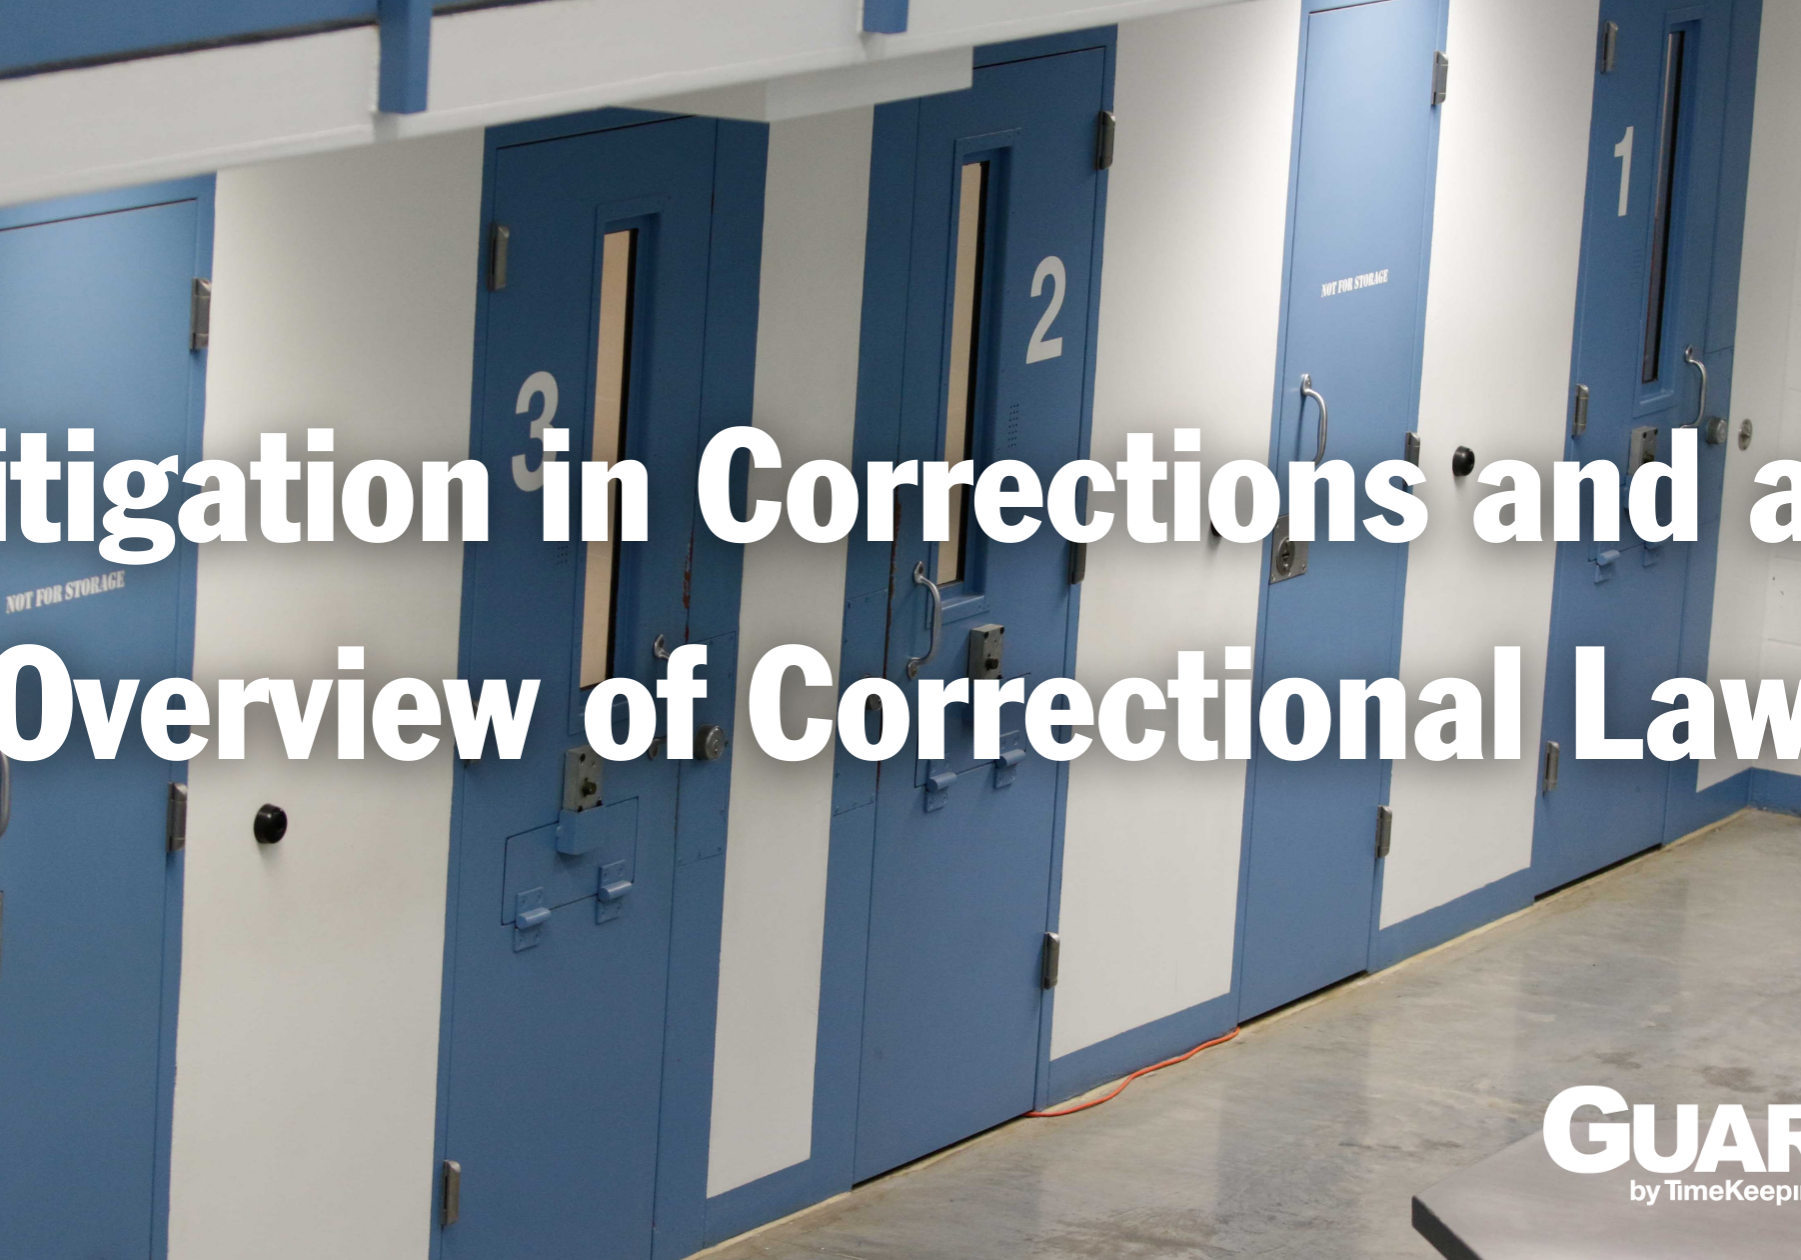 litigation-in-corrections-and-an-overview-of-correctional-law